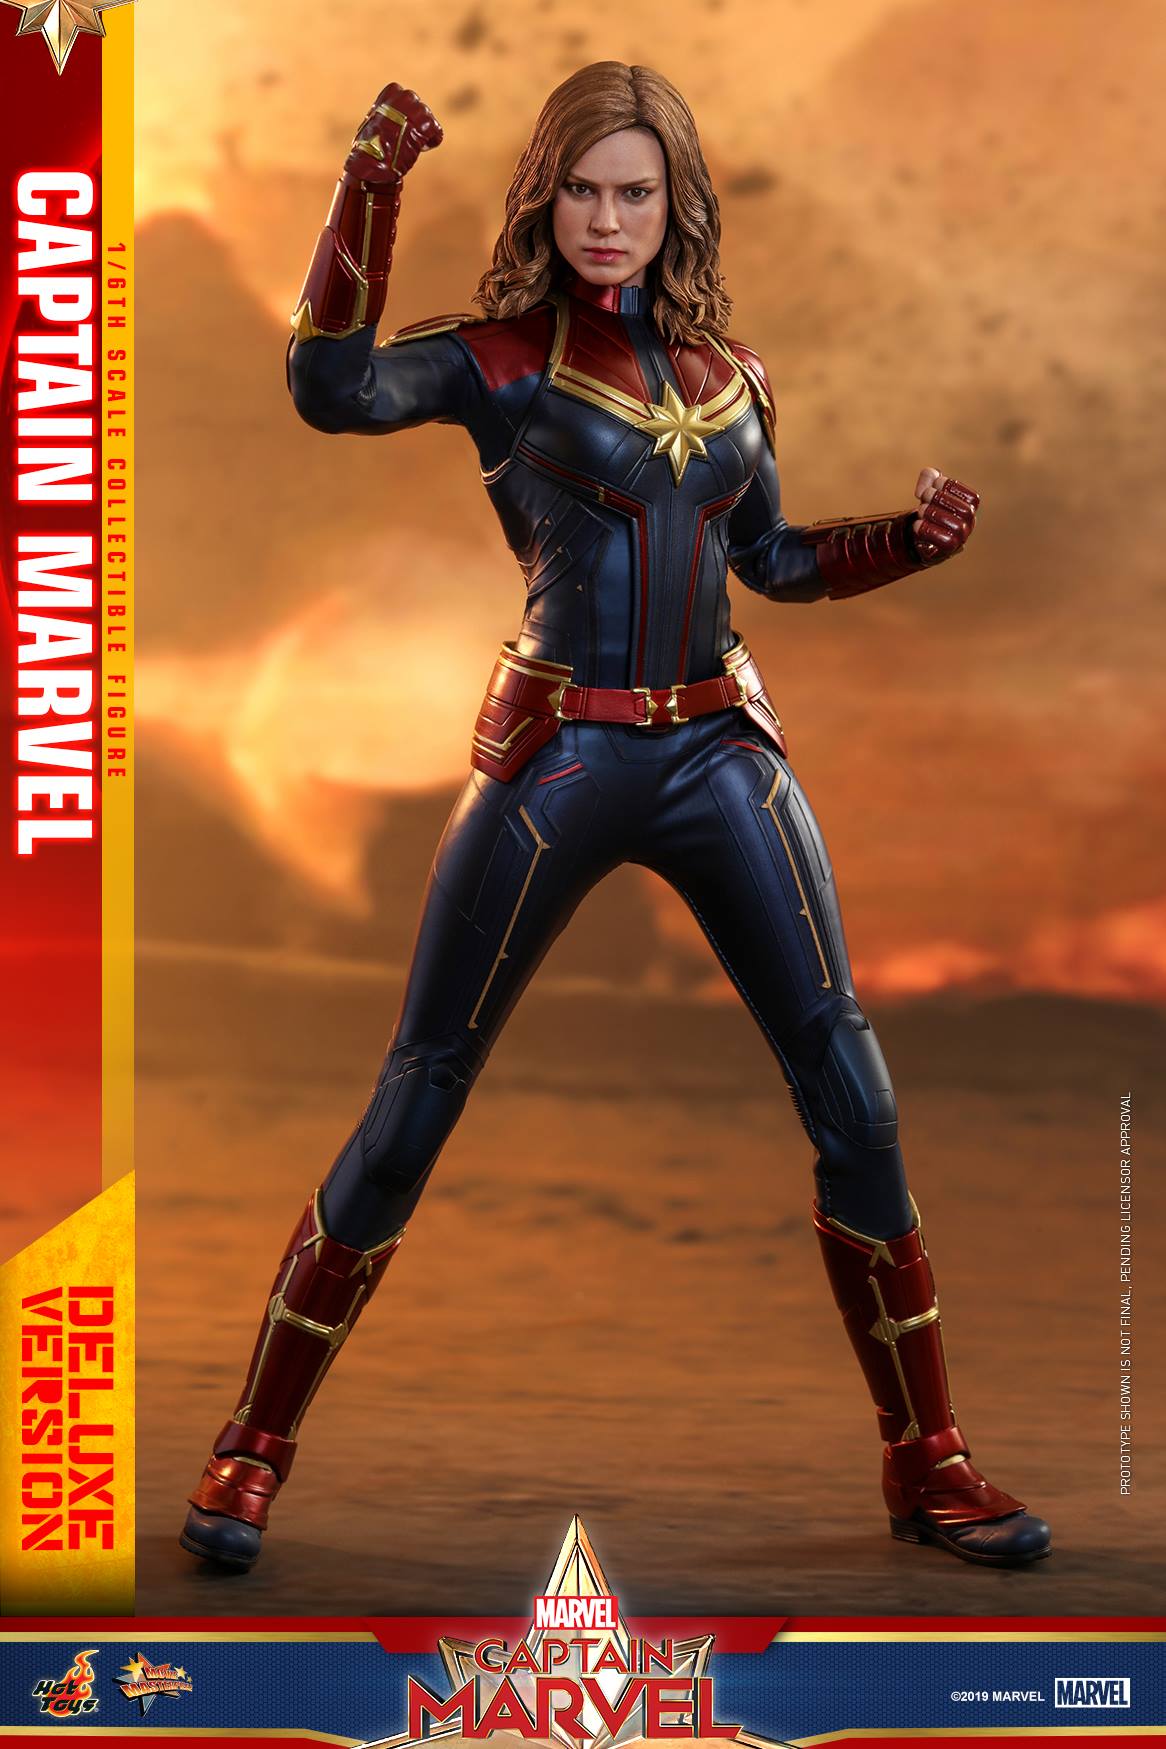 Hot Toys Marvel Captain Marvel Deluxe Sixth Scale Figure MMS522